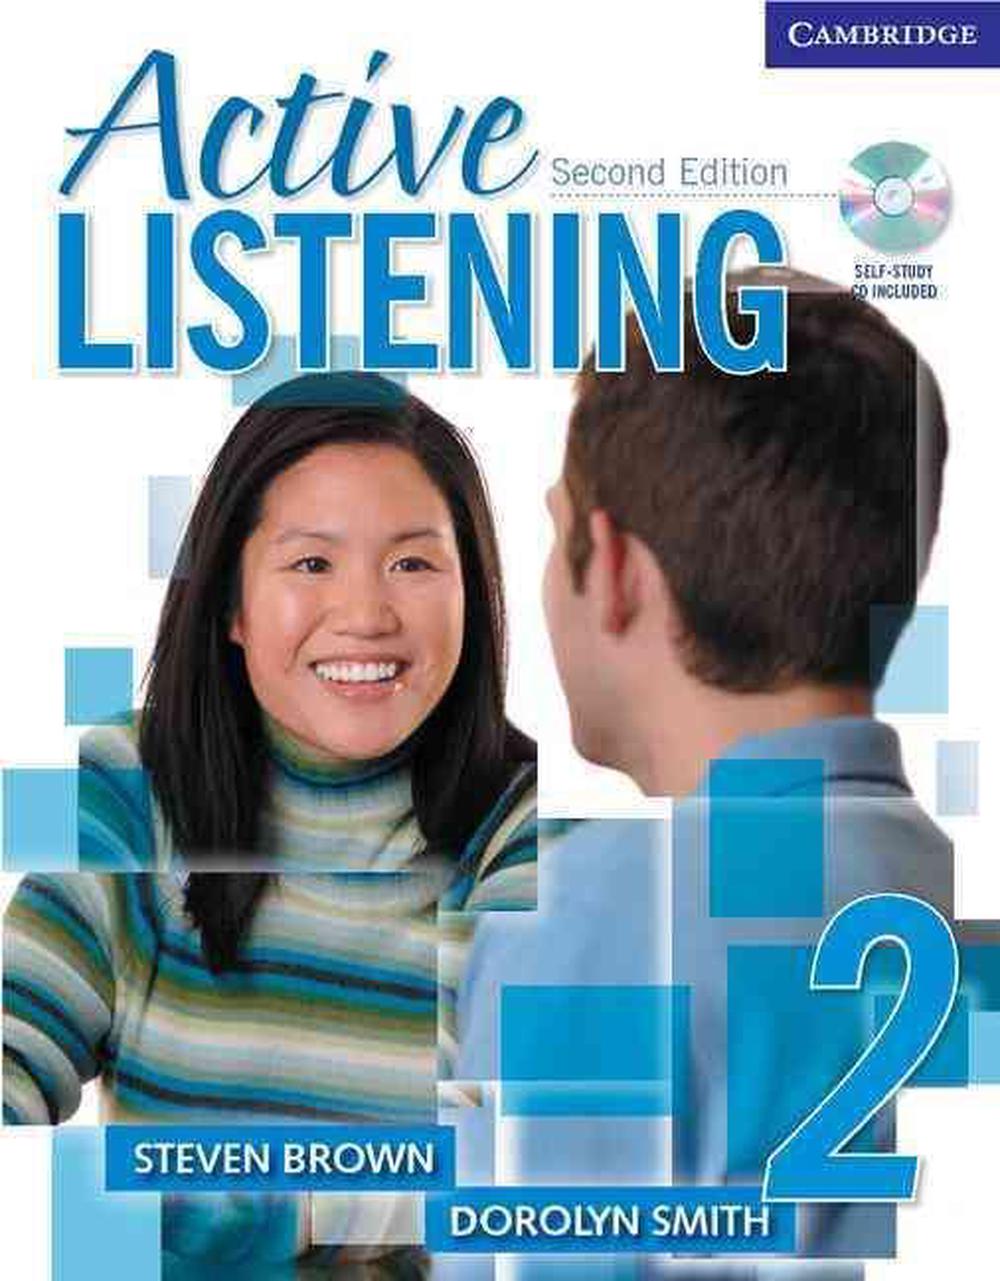 online　Active　Listening　with　Buy　Paperback,　9780521678179　Nile　Self-study　Steven　Student's　by　CD　Brown,　Book　The　Audio　at